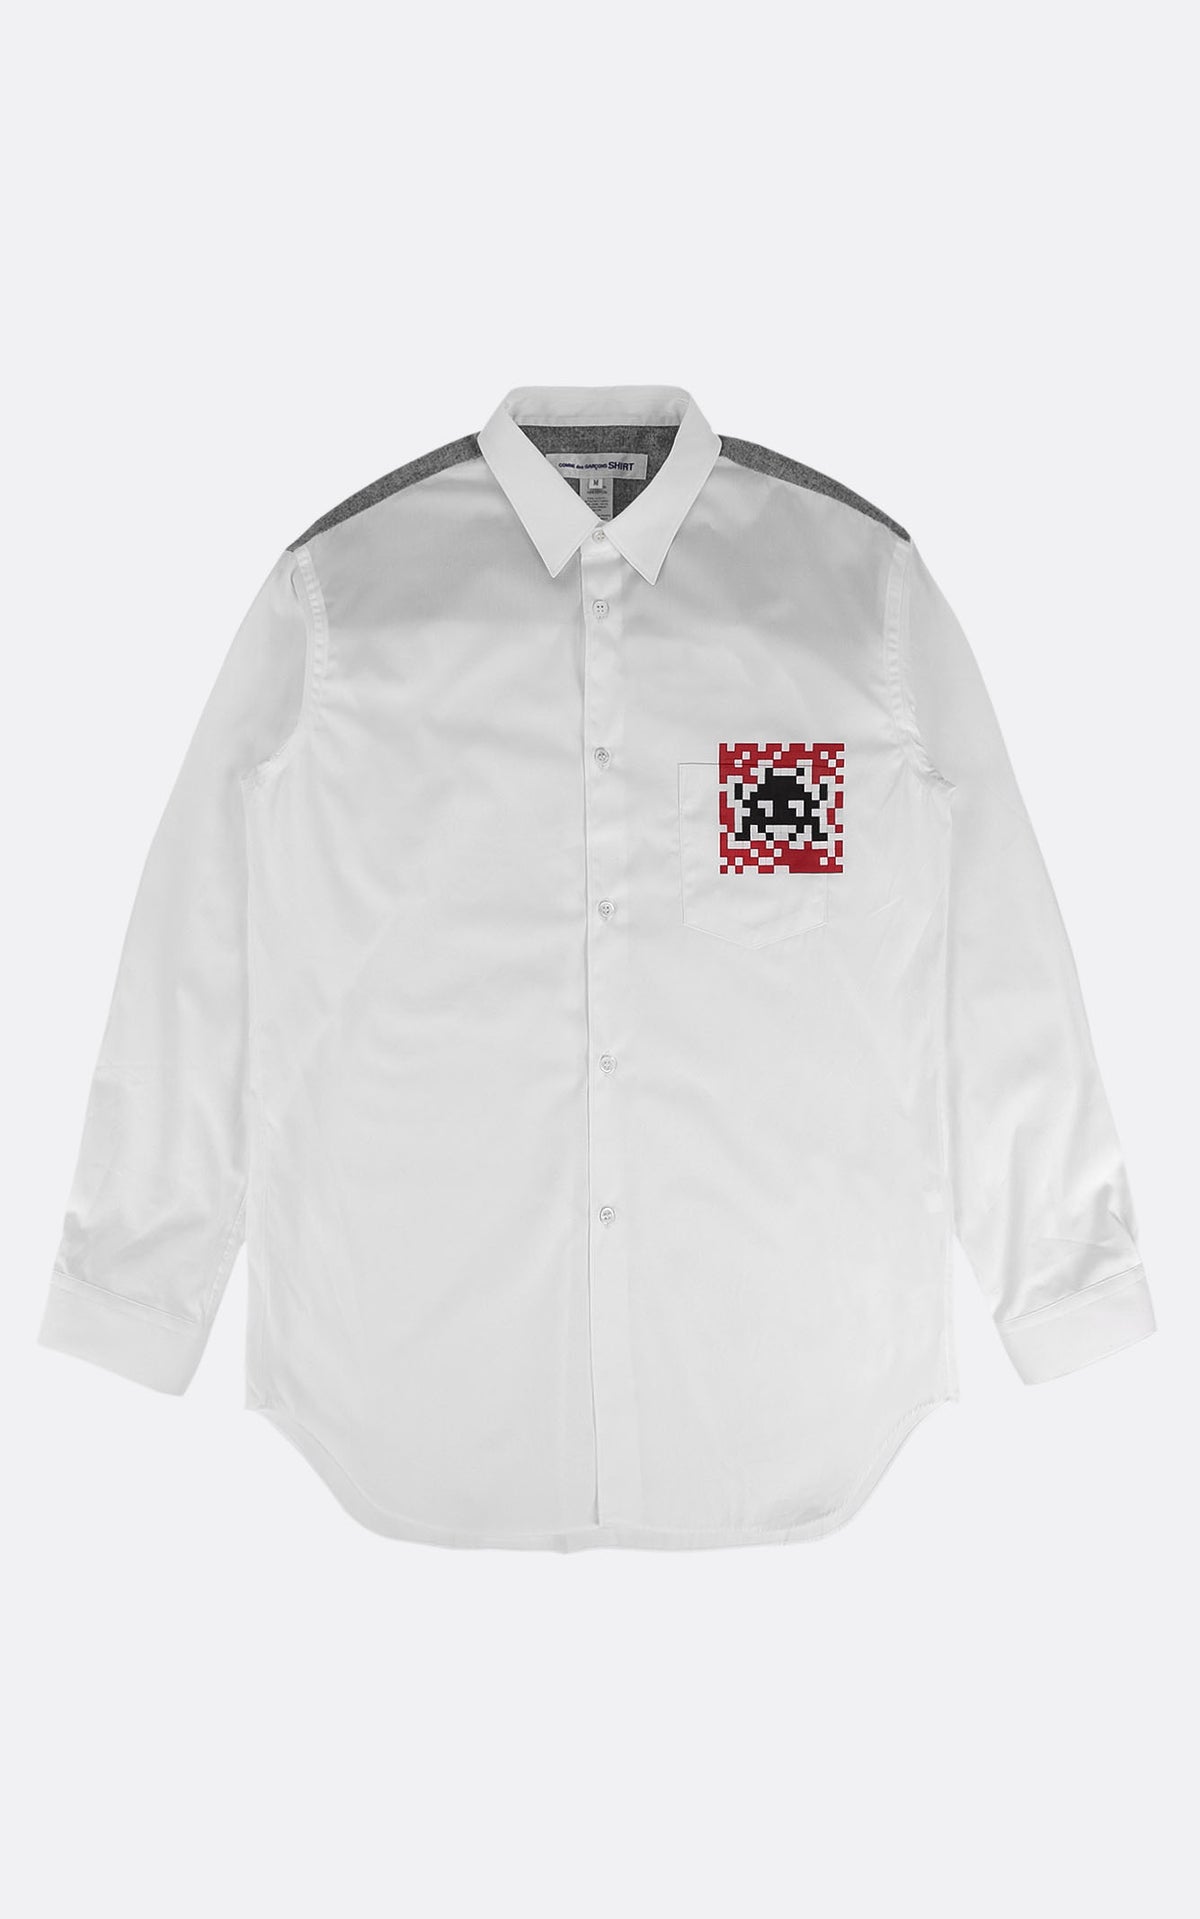 MENS SHIRT WOVEN SPACE INVADER WHITE / GREY